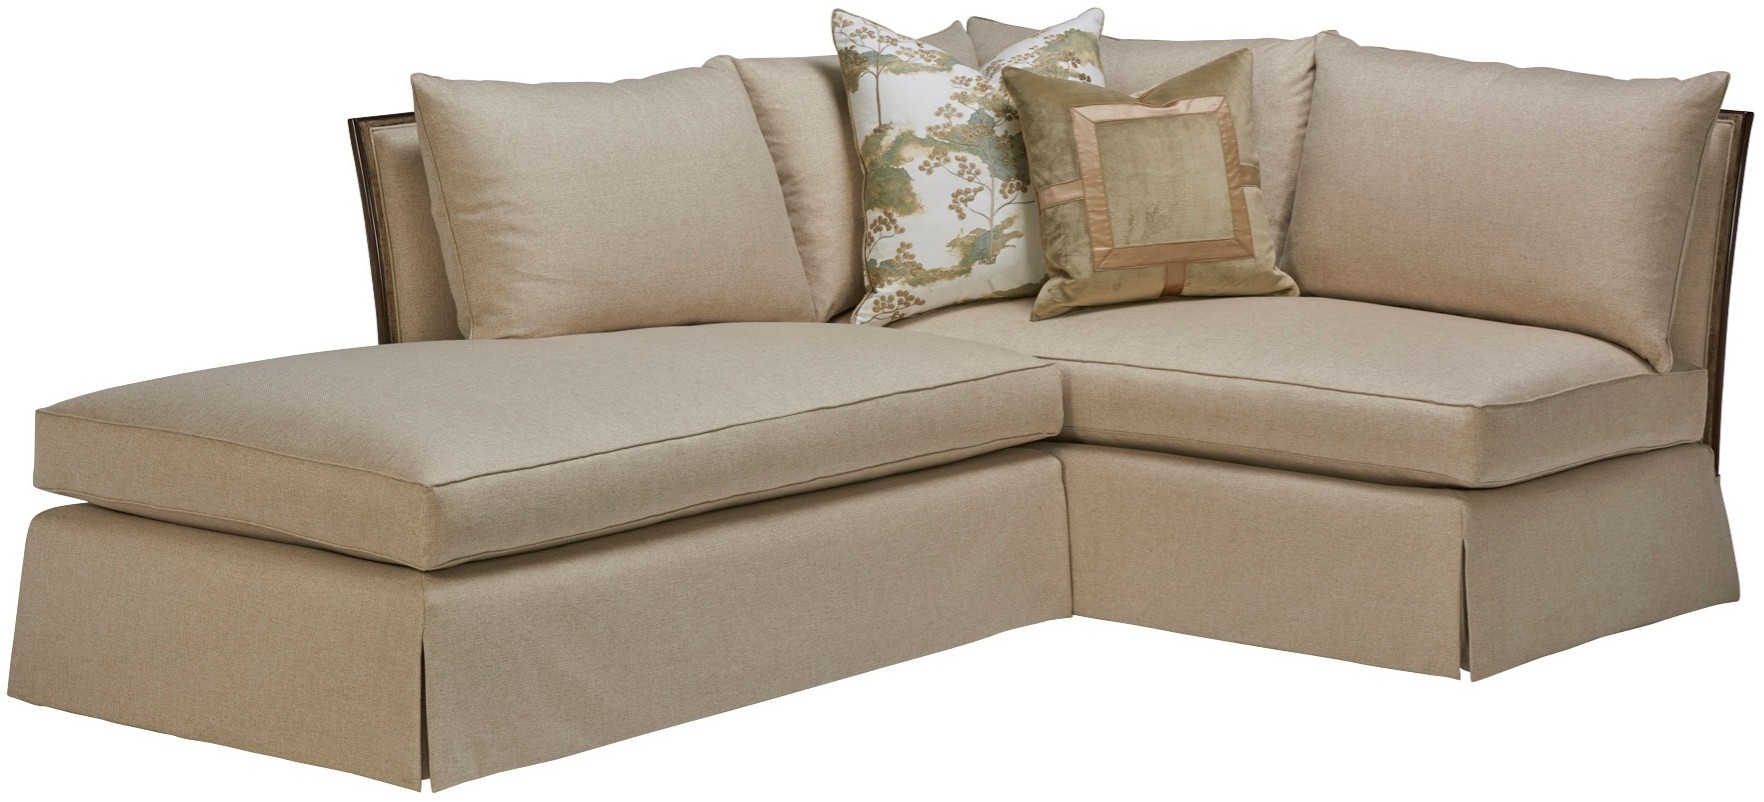 SECTIONALS - Leather & High End Upholstered Furniture Gorgeous Riches of Earth Sectional